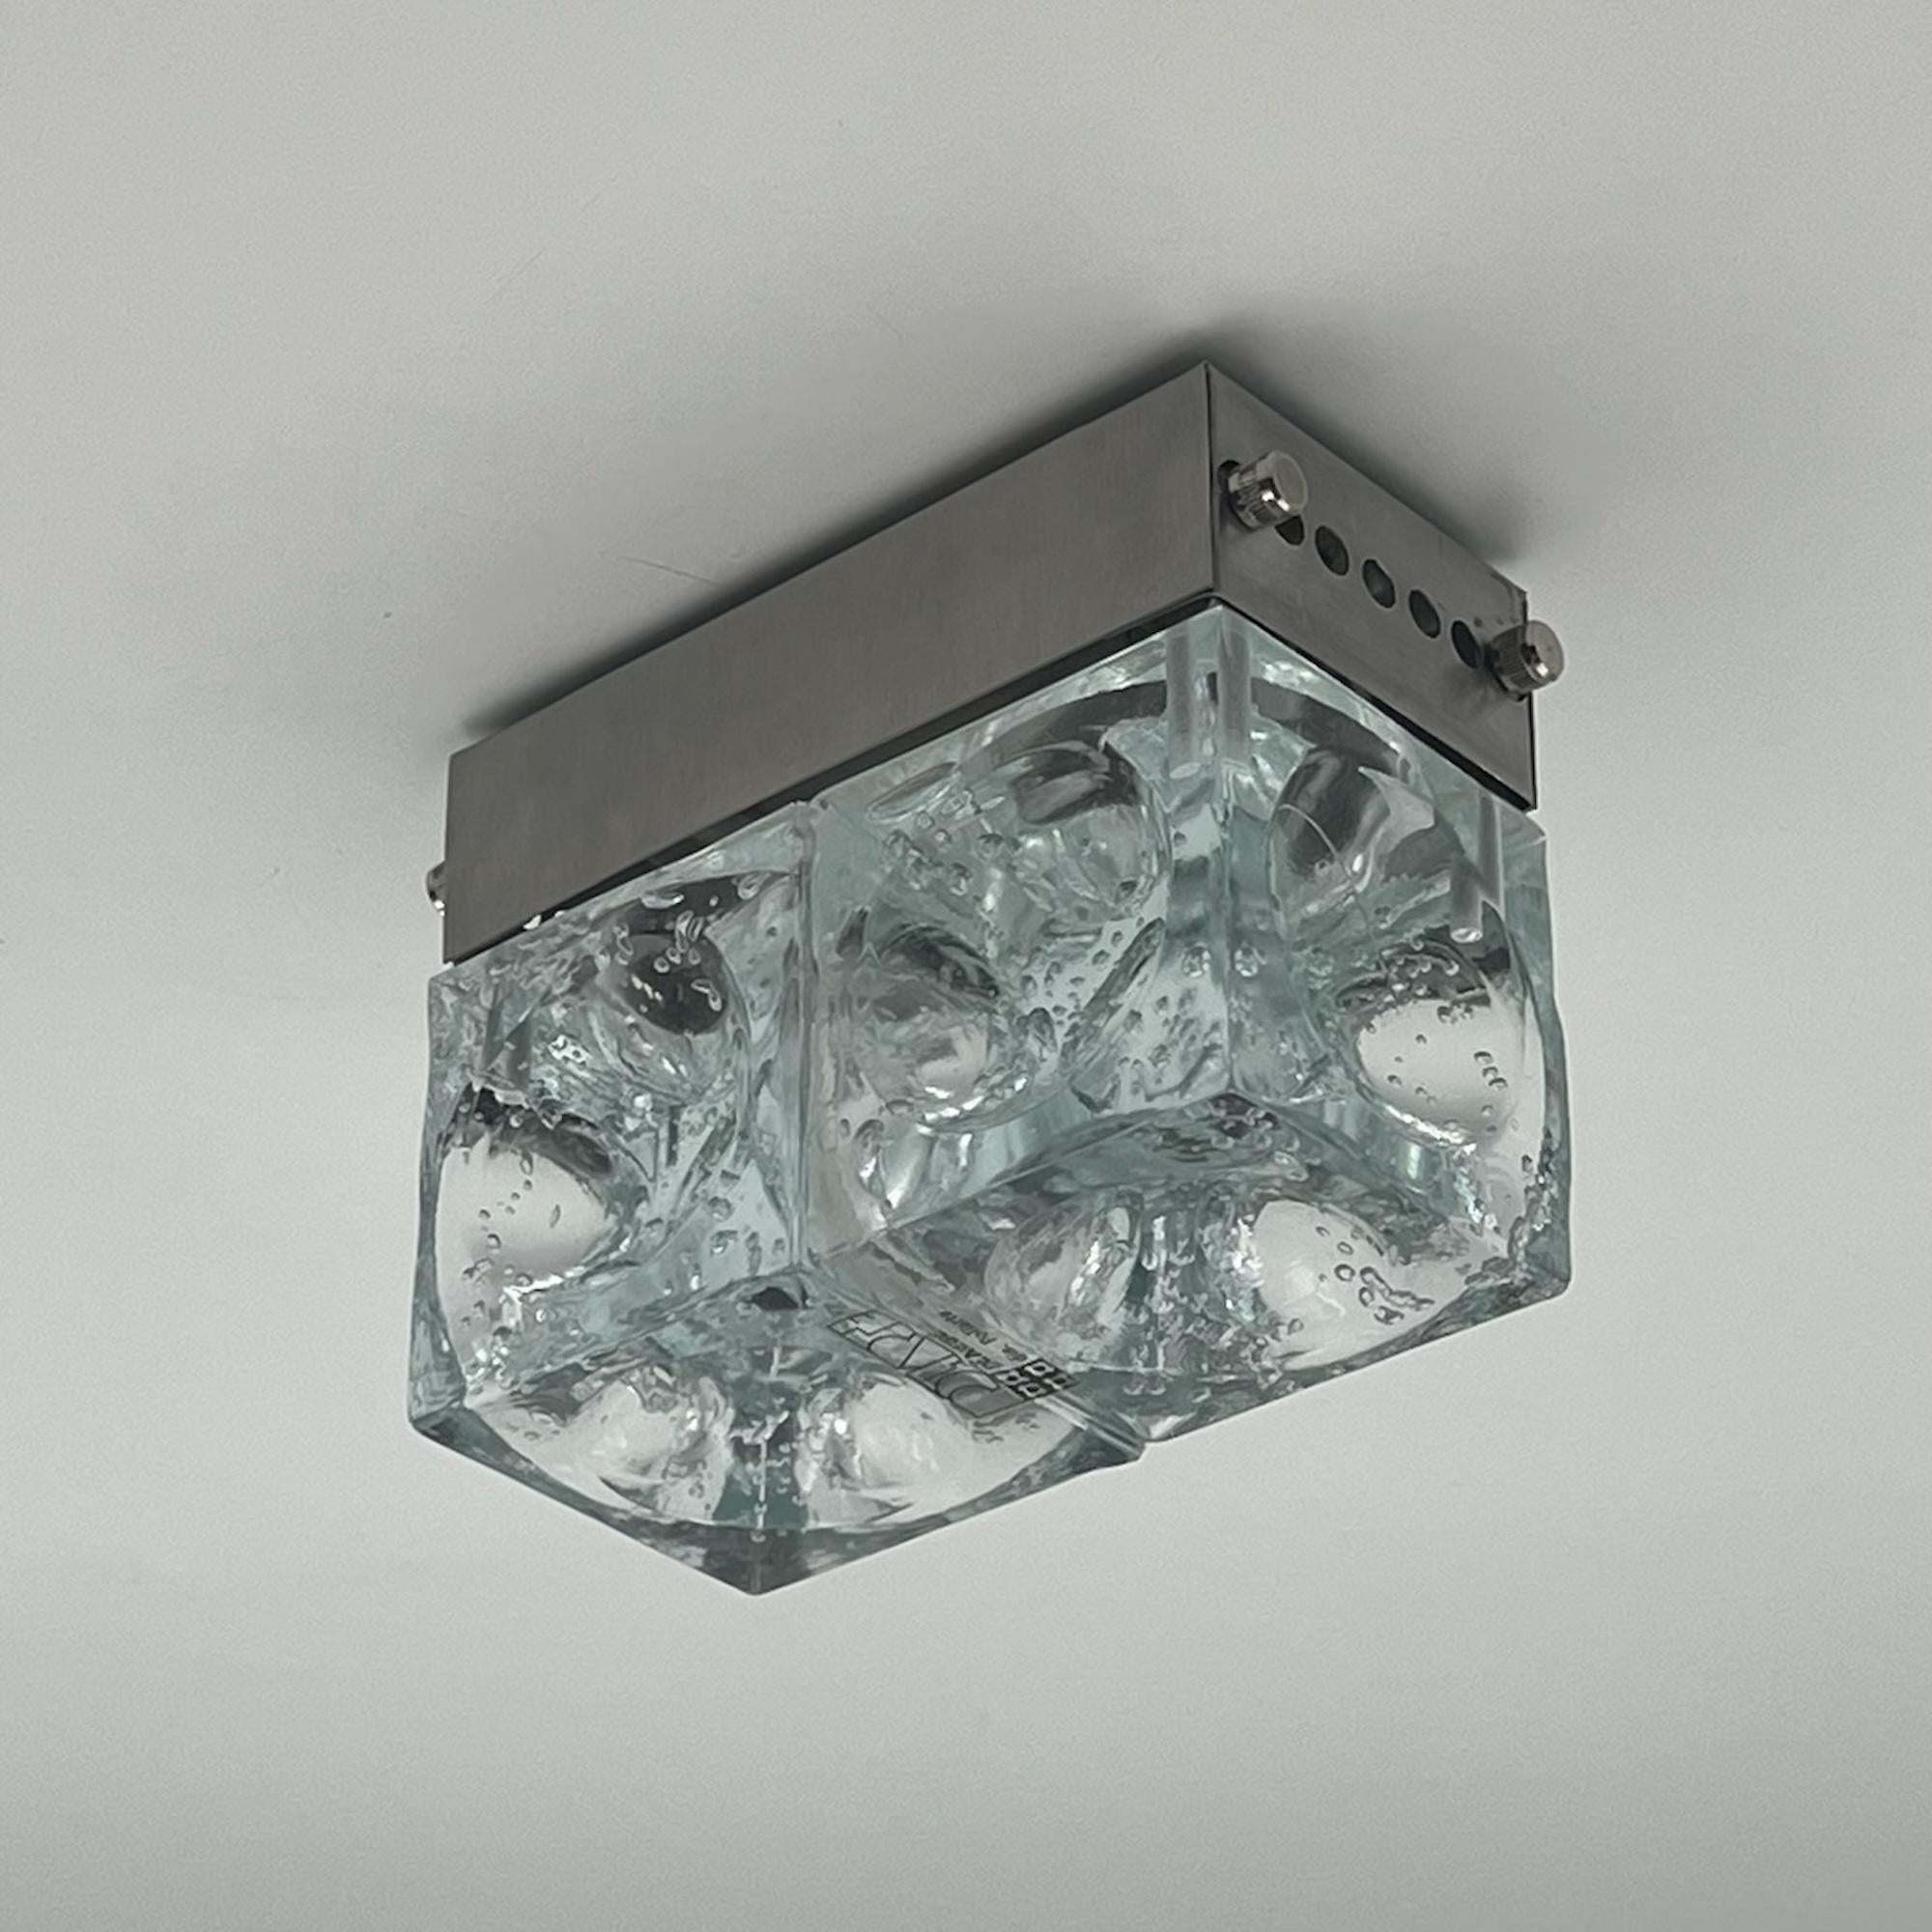 Space Age Iconic Poliarte Lamp 'Denebe' - Handmade Glass Cubes Made in Italy For Sale